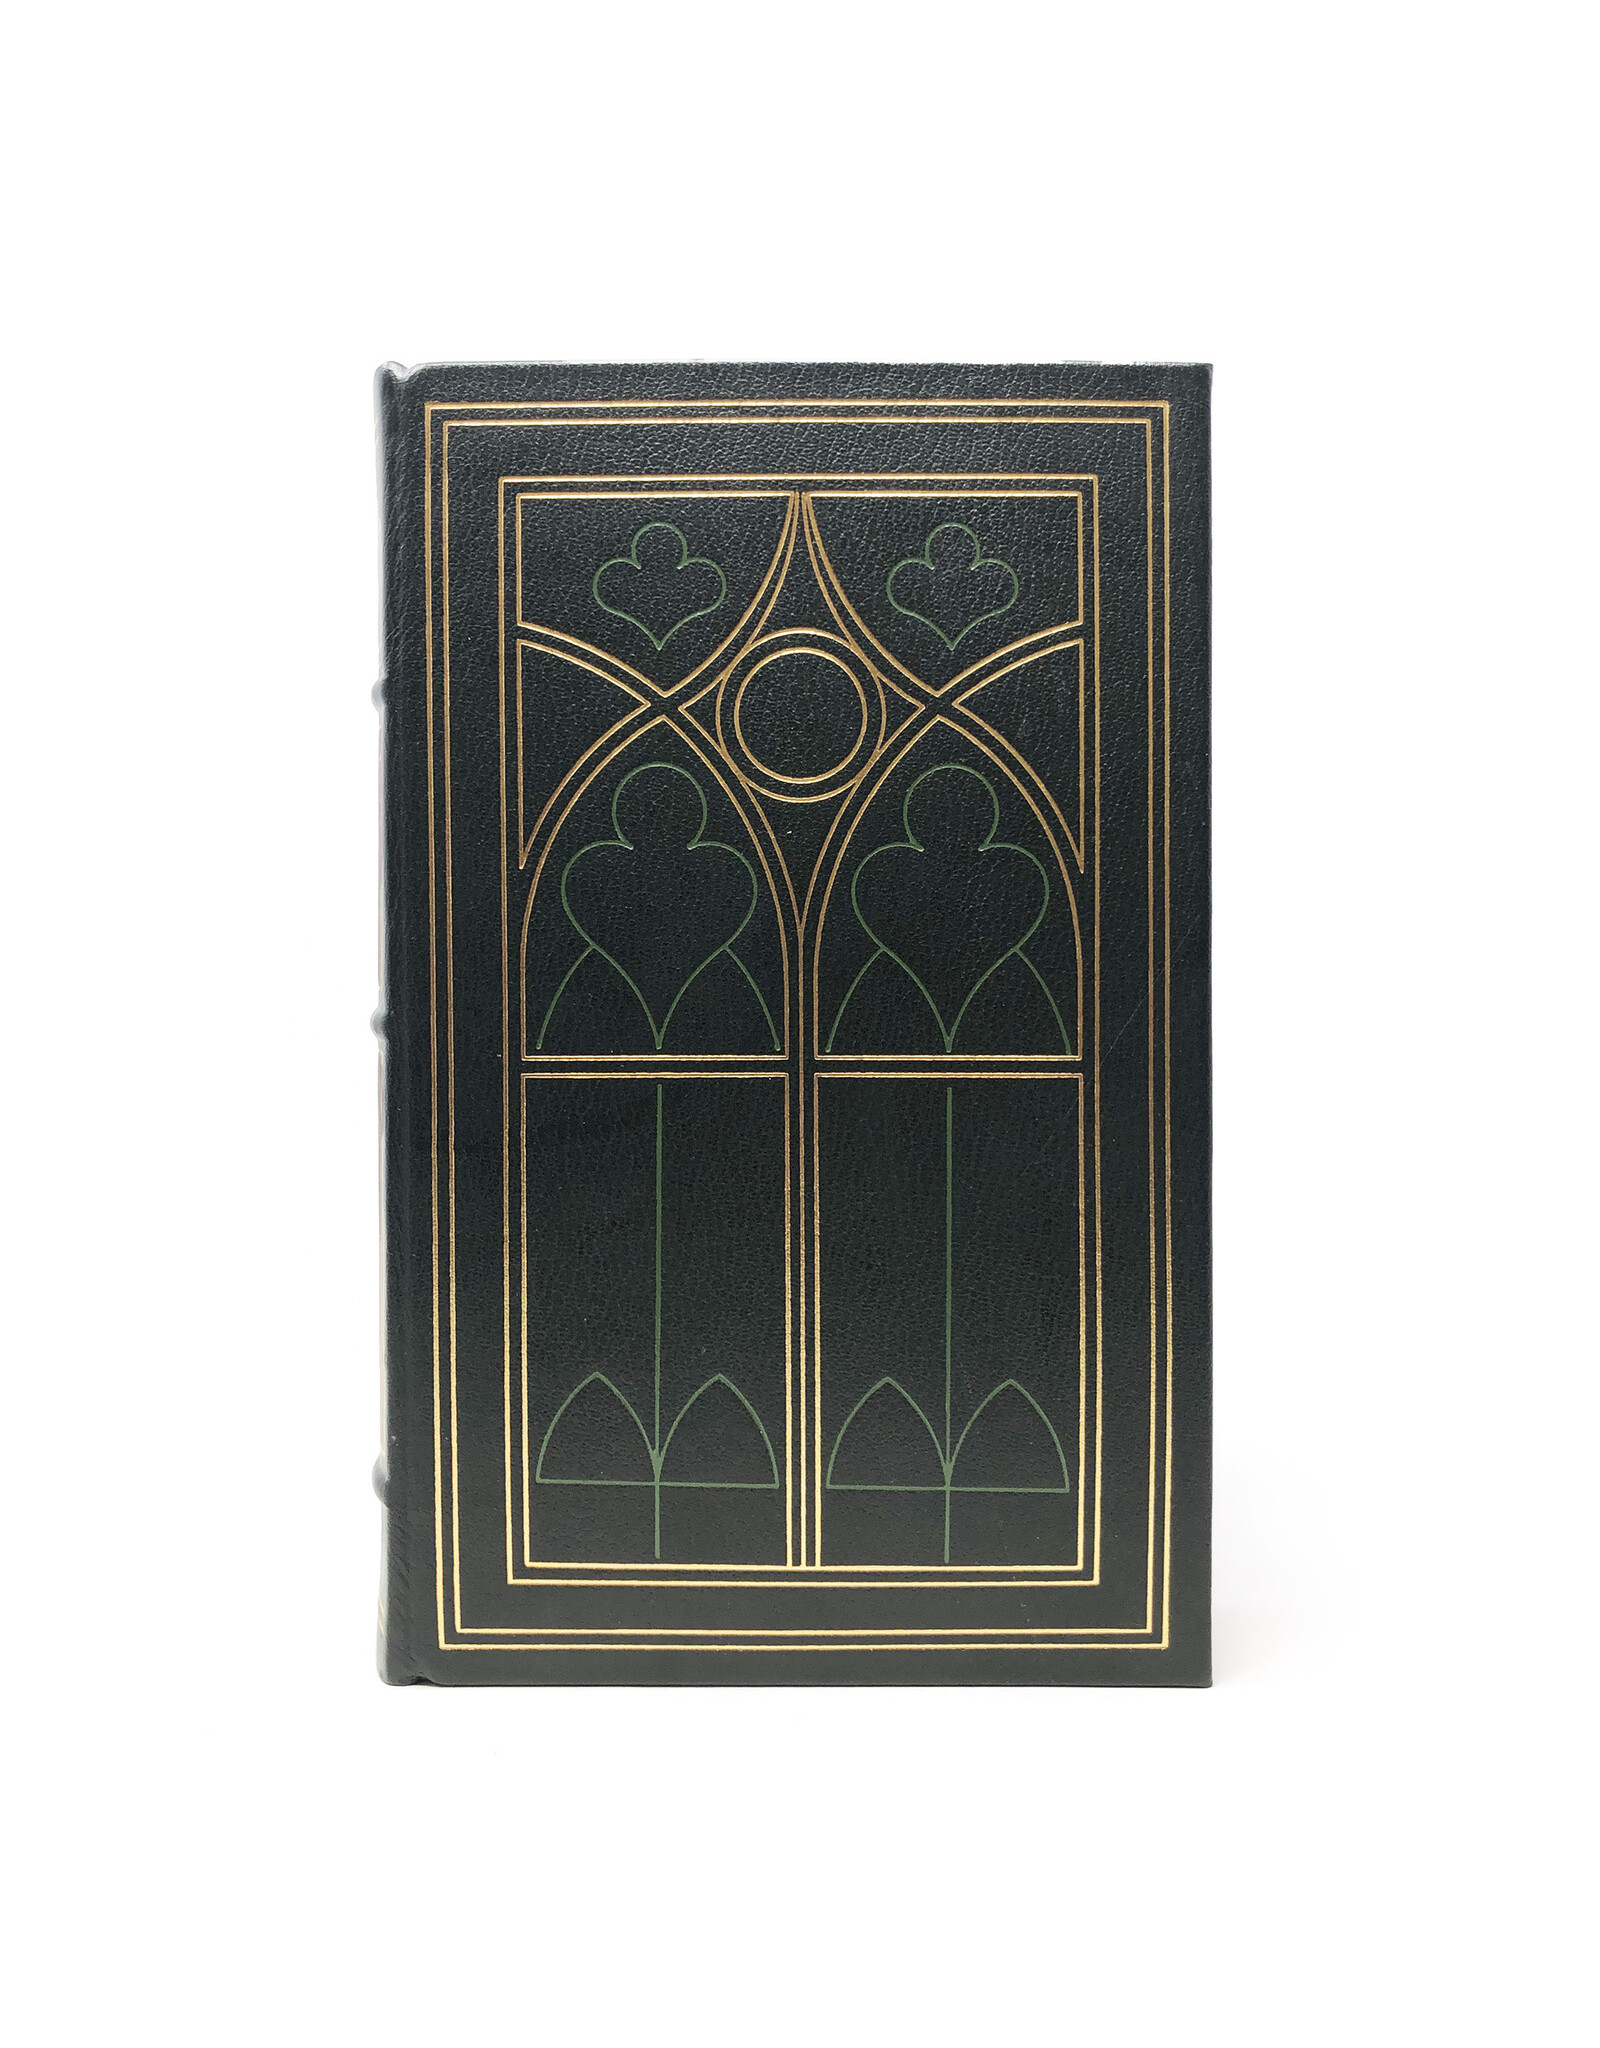 Franklin Library O'Connor, Edge of Sadness Franklin Library Pulitzer Prize Limited Edition Full Leather